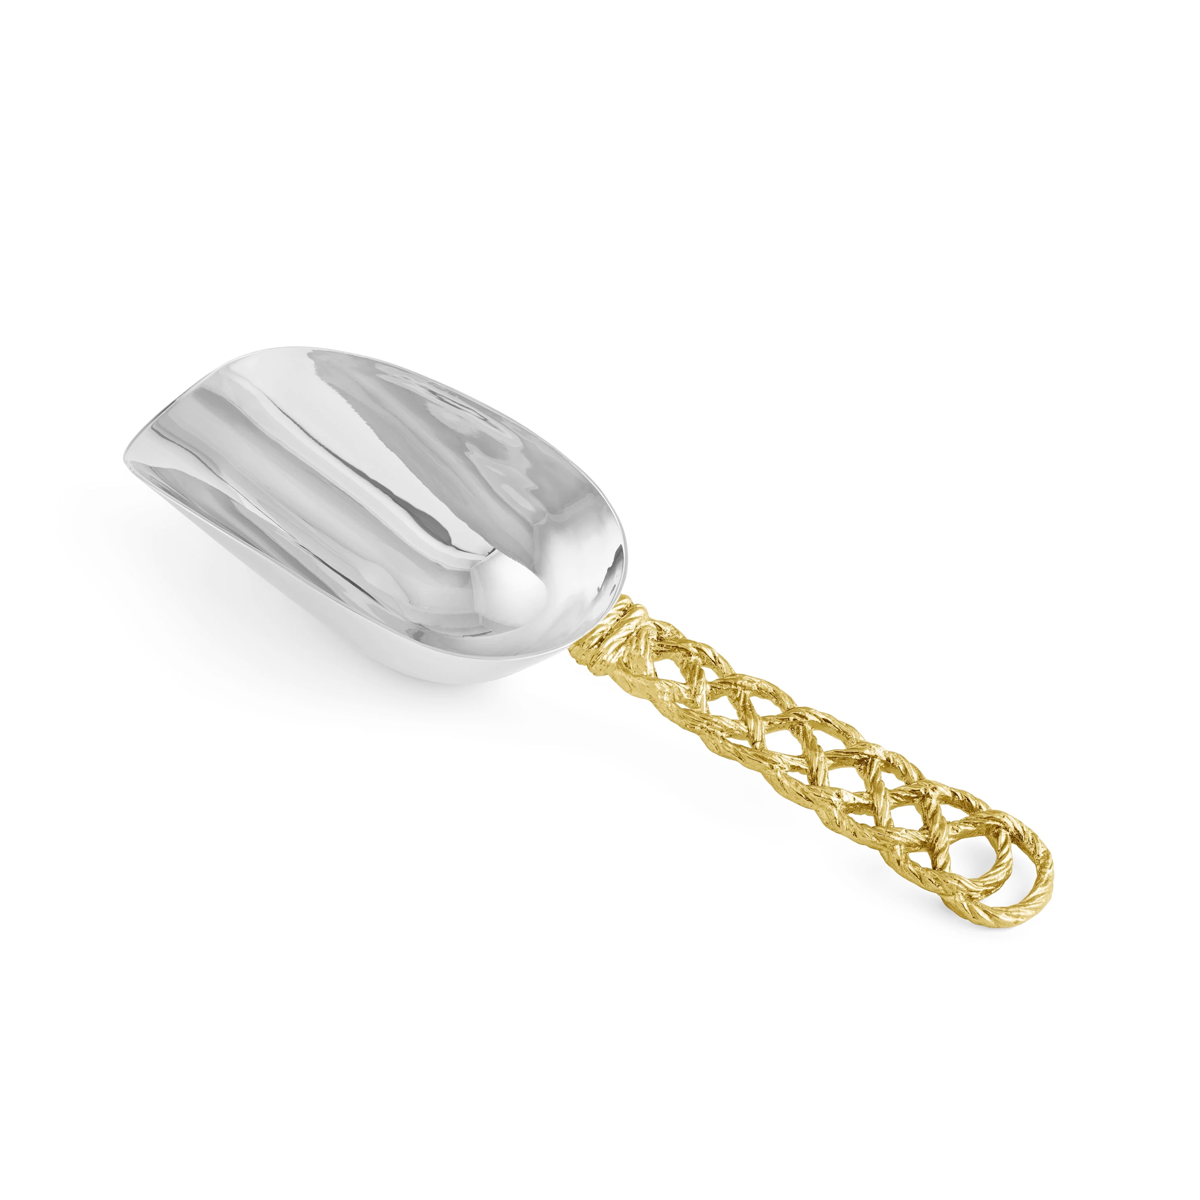 Love Knotted Ice Scoop, Michael Aram - RSVP Style